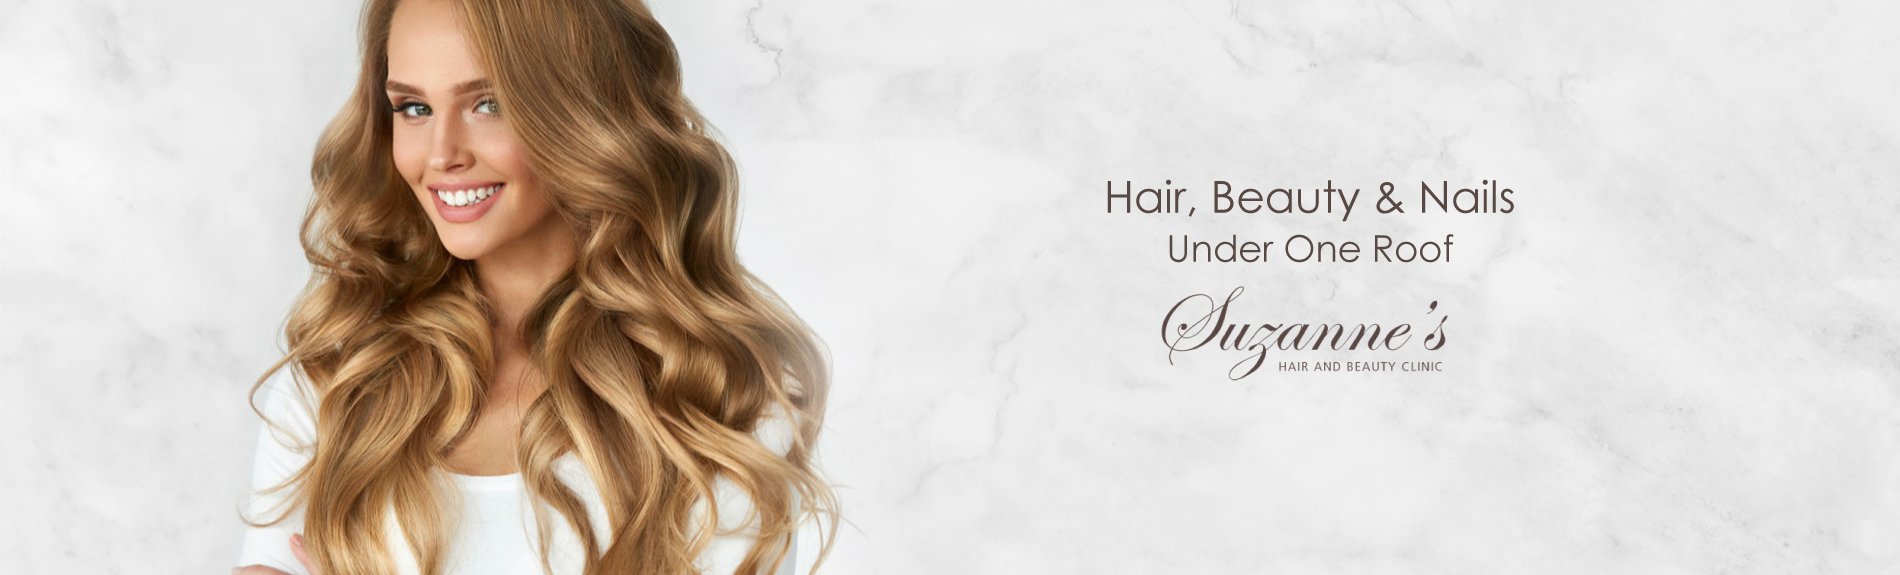 Visit the best hair & beauty salon in Coventry - Suzanne's